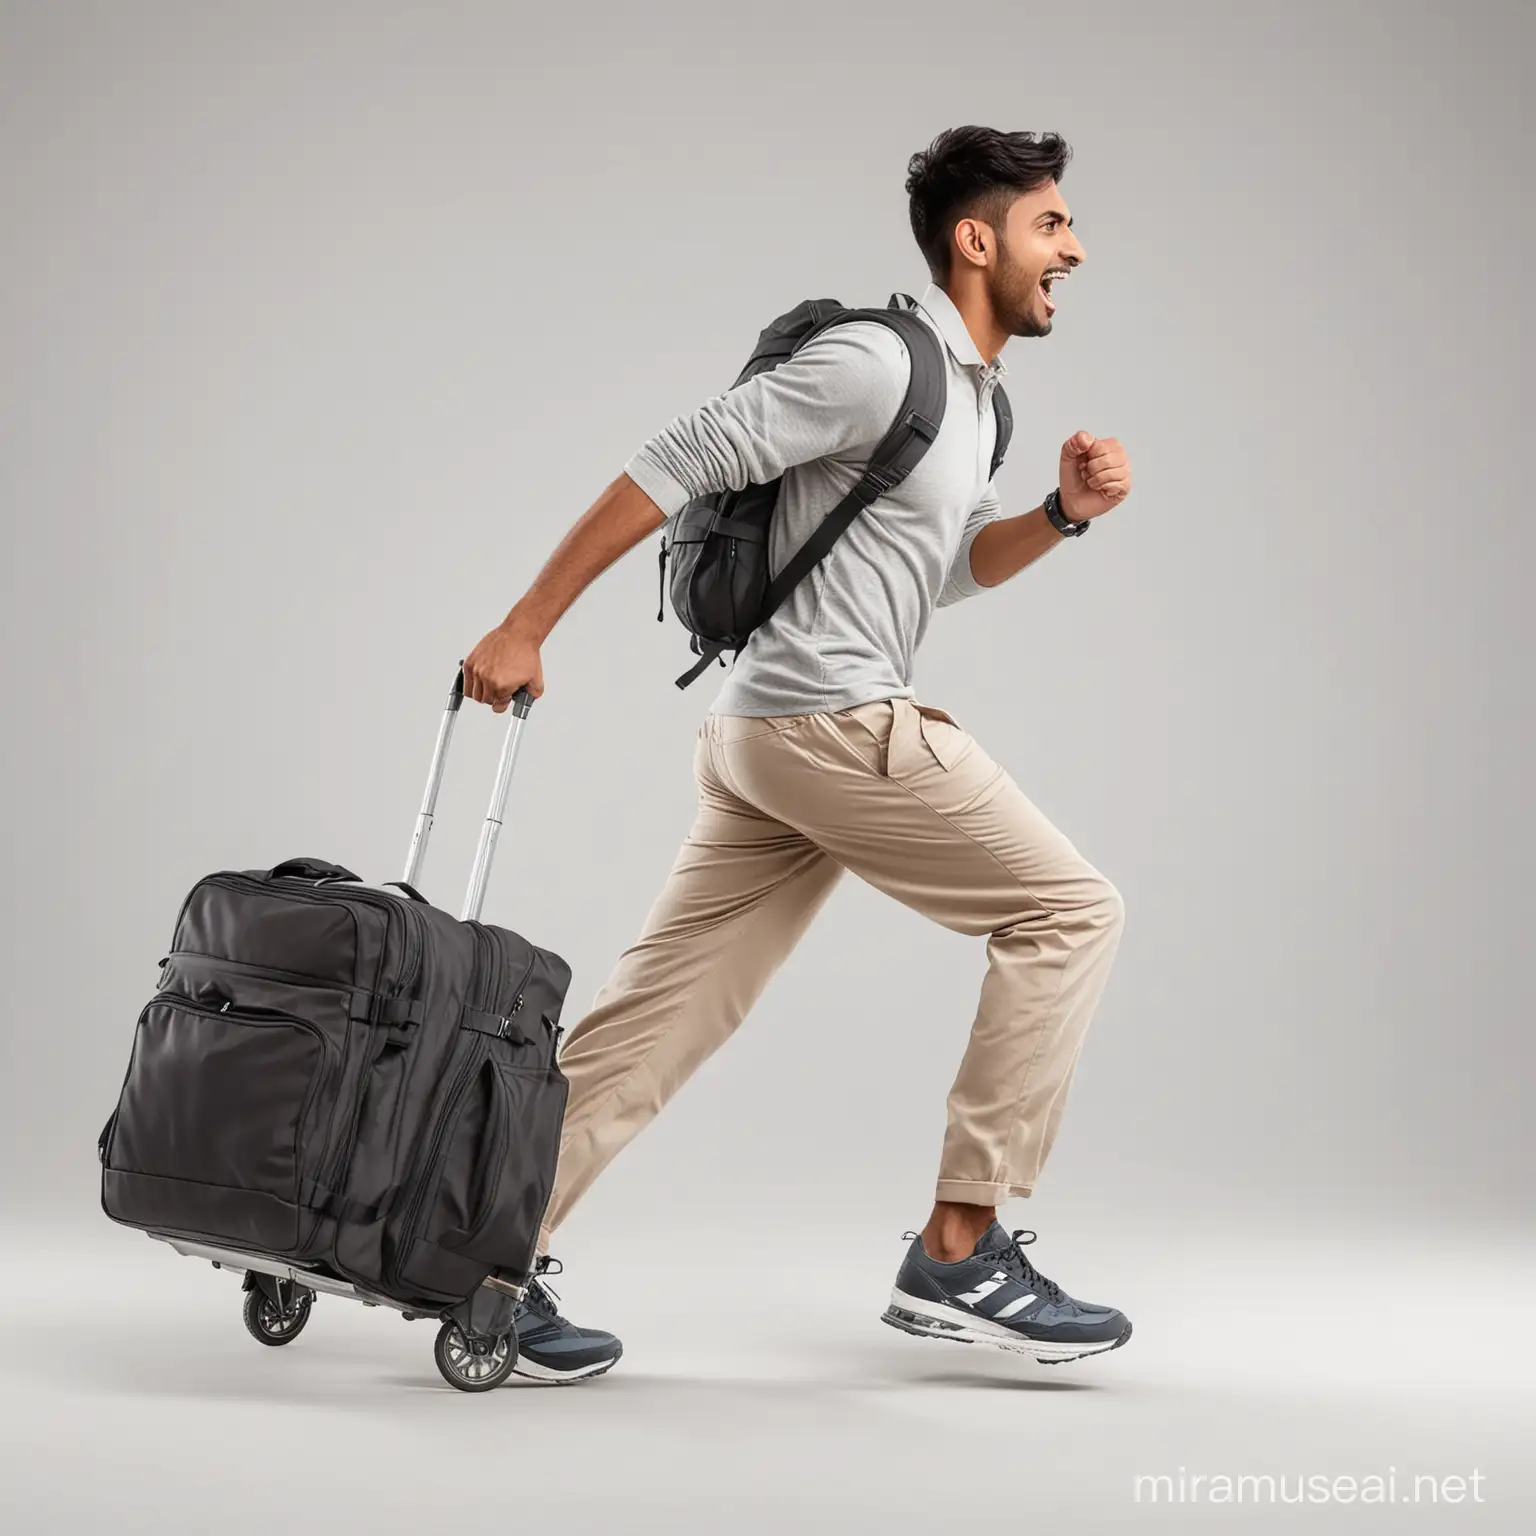 Modern Indian young man excited running side view with 
travel trolley bag white background high resolution realistic 
Photo